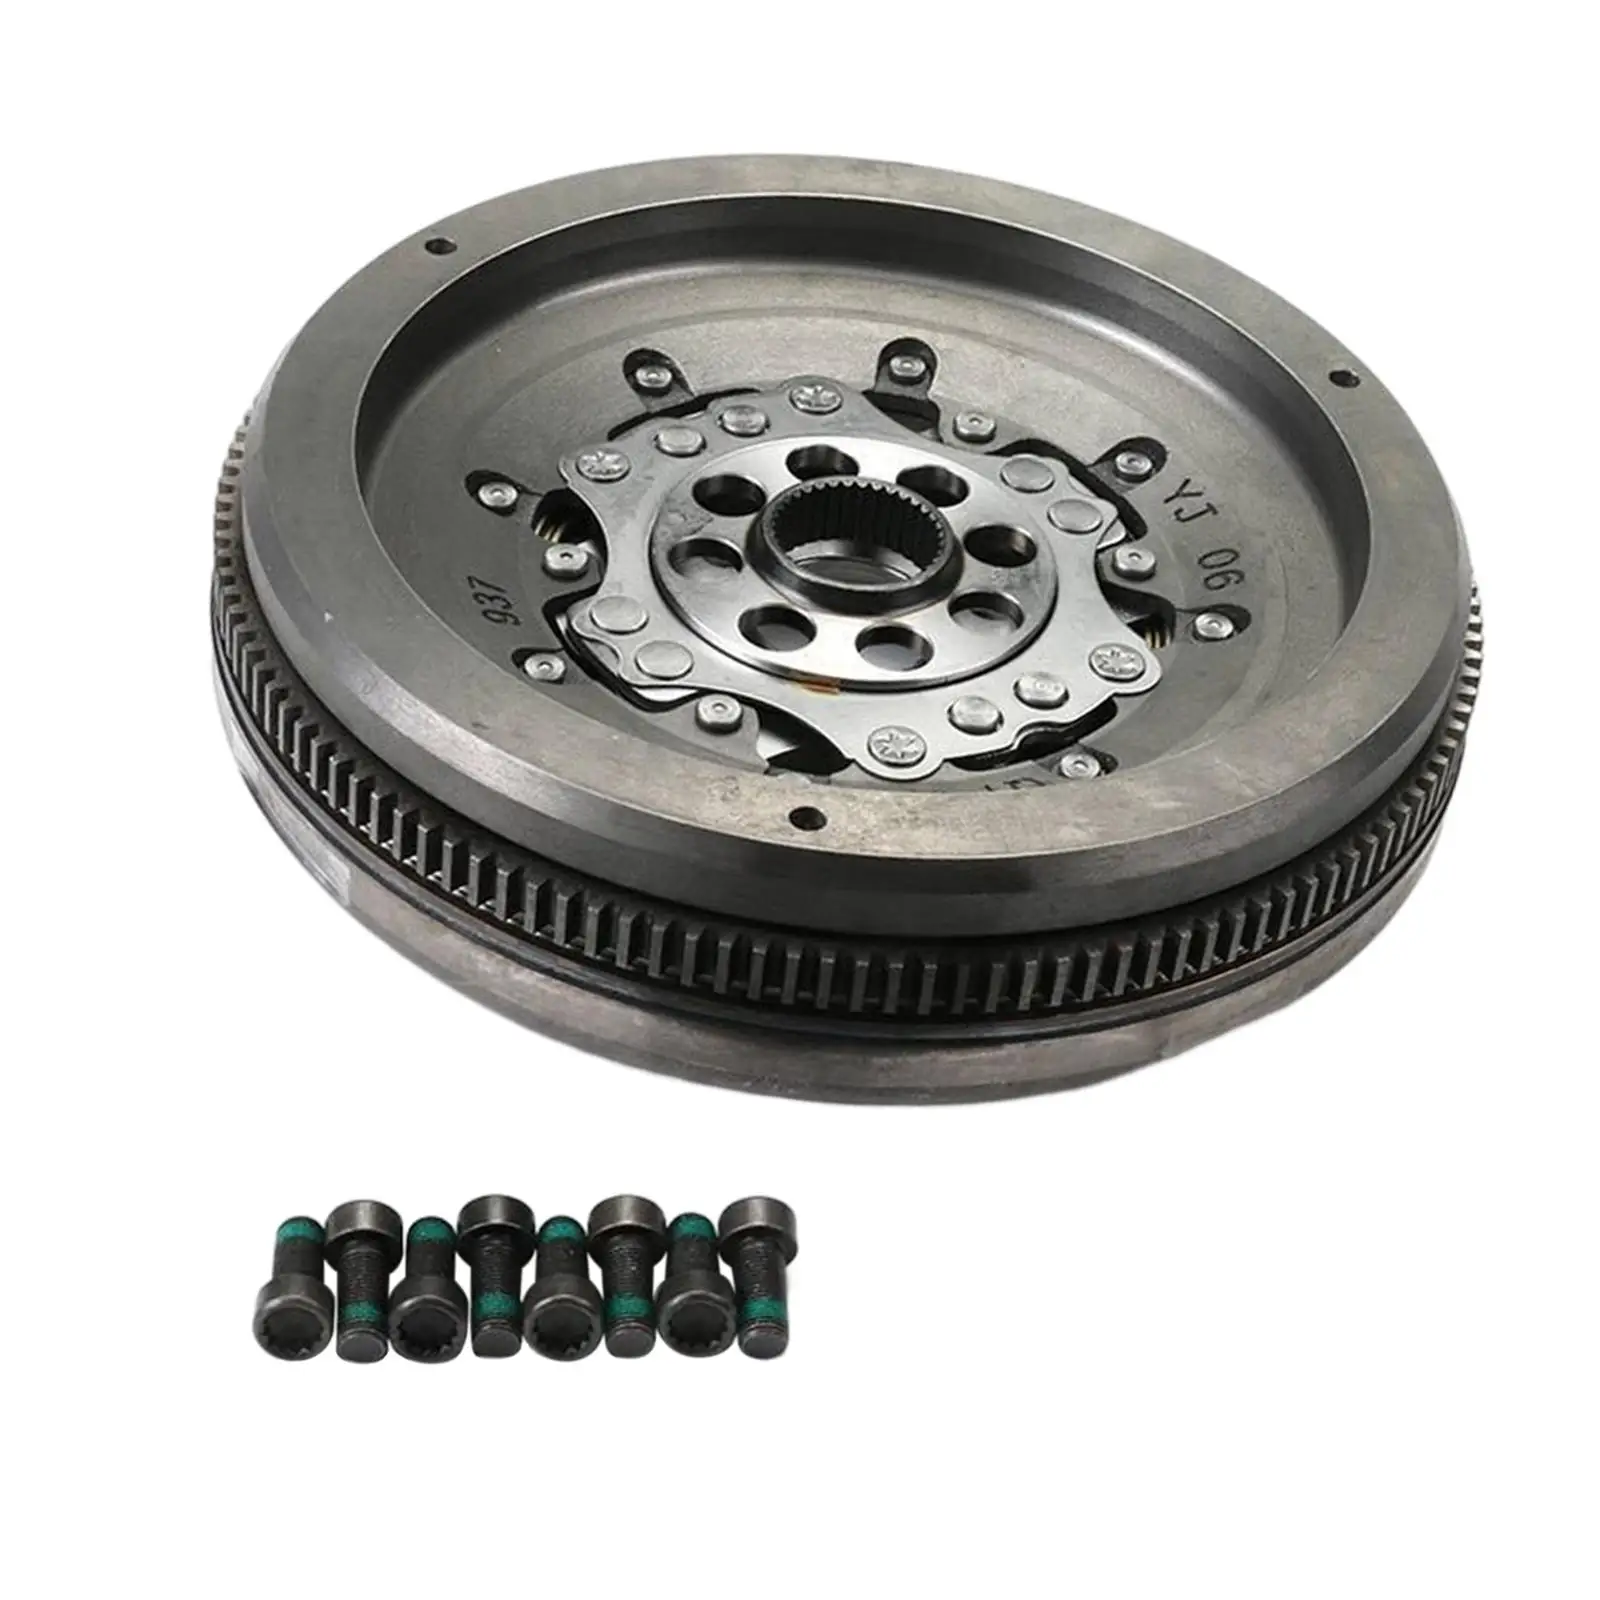 Vehicle Transmission Flywheel 02E Dq250 for VW Replace High Performance